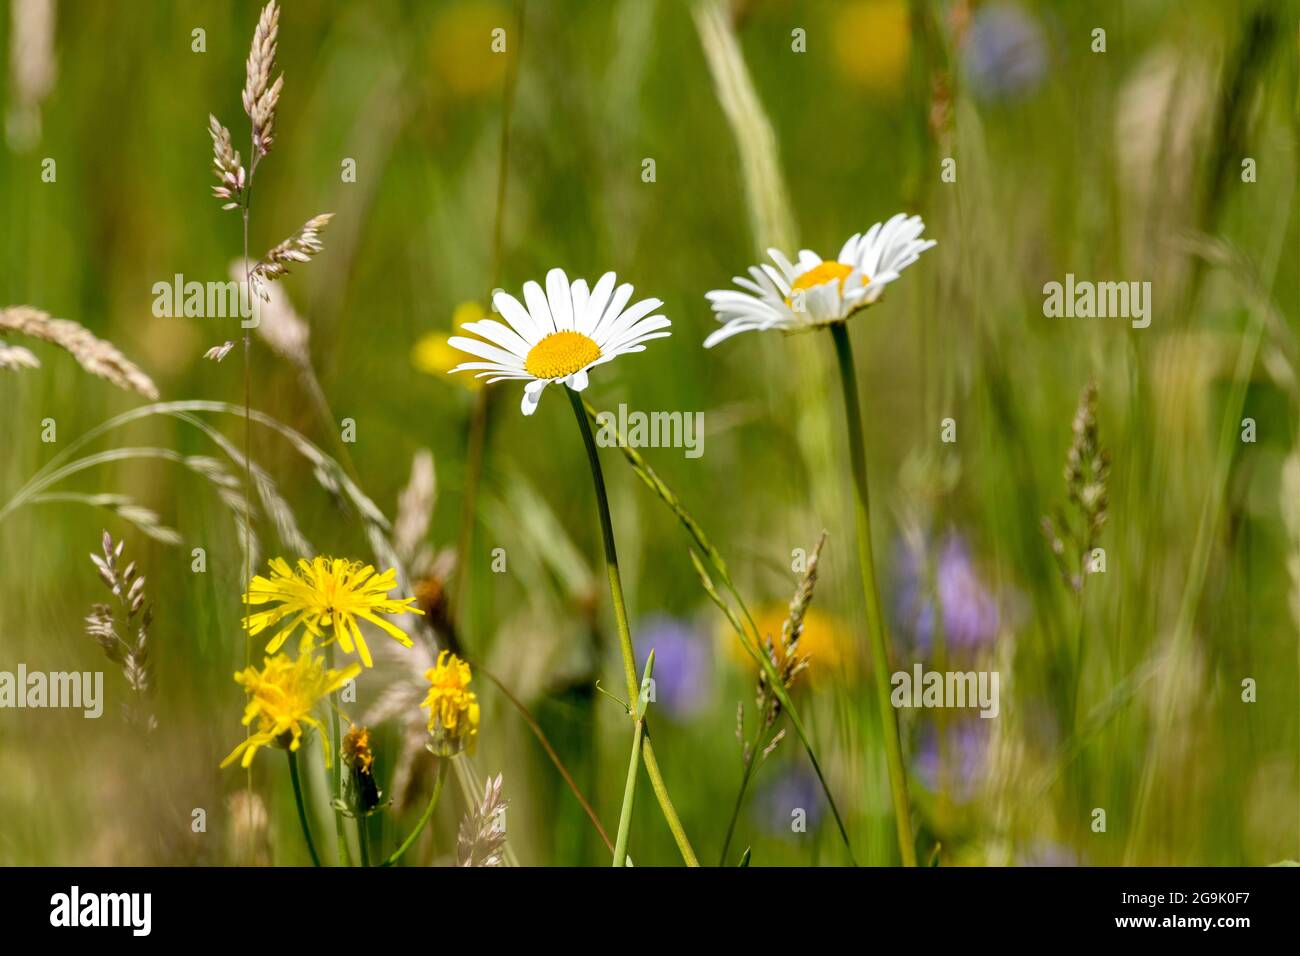 Flowering marguerites (Leucanthemum) and grasses in wild, natural flower meadow, Germany Stock Photo